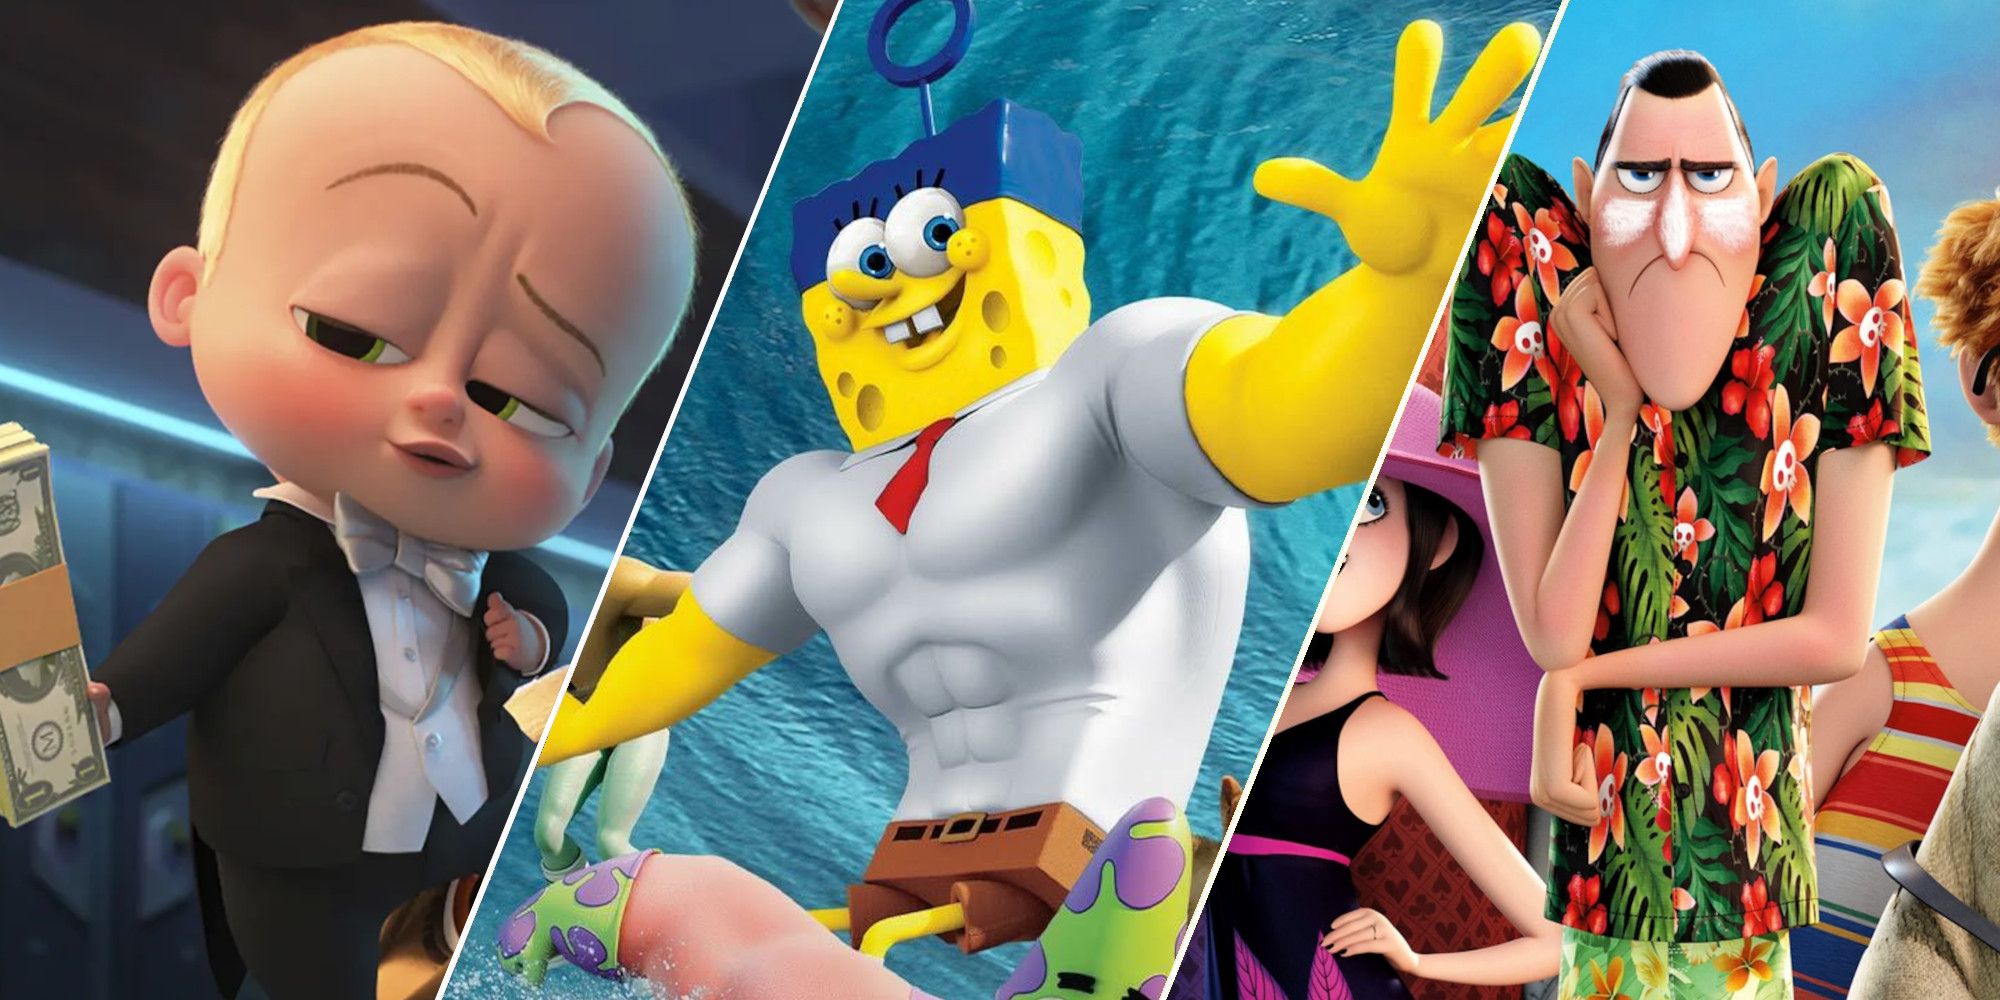 A collage of underrated animated movie sequels, featuring stills from The Boss Baby: Family Business, The SpongeBob Movie: Sponge Out of Water, and Hotel Transylvania 3: Summer Vacation